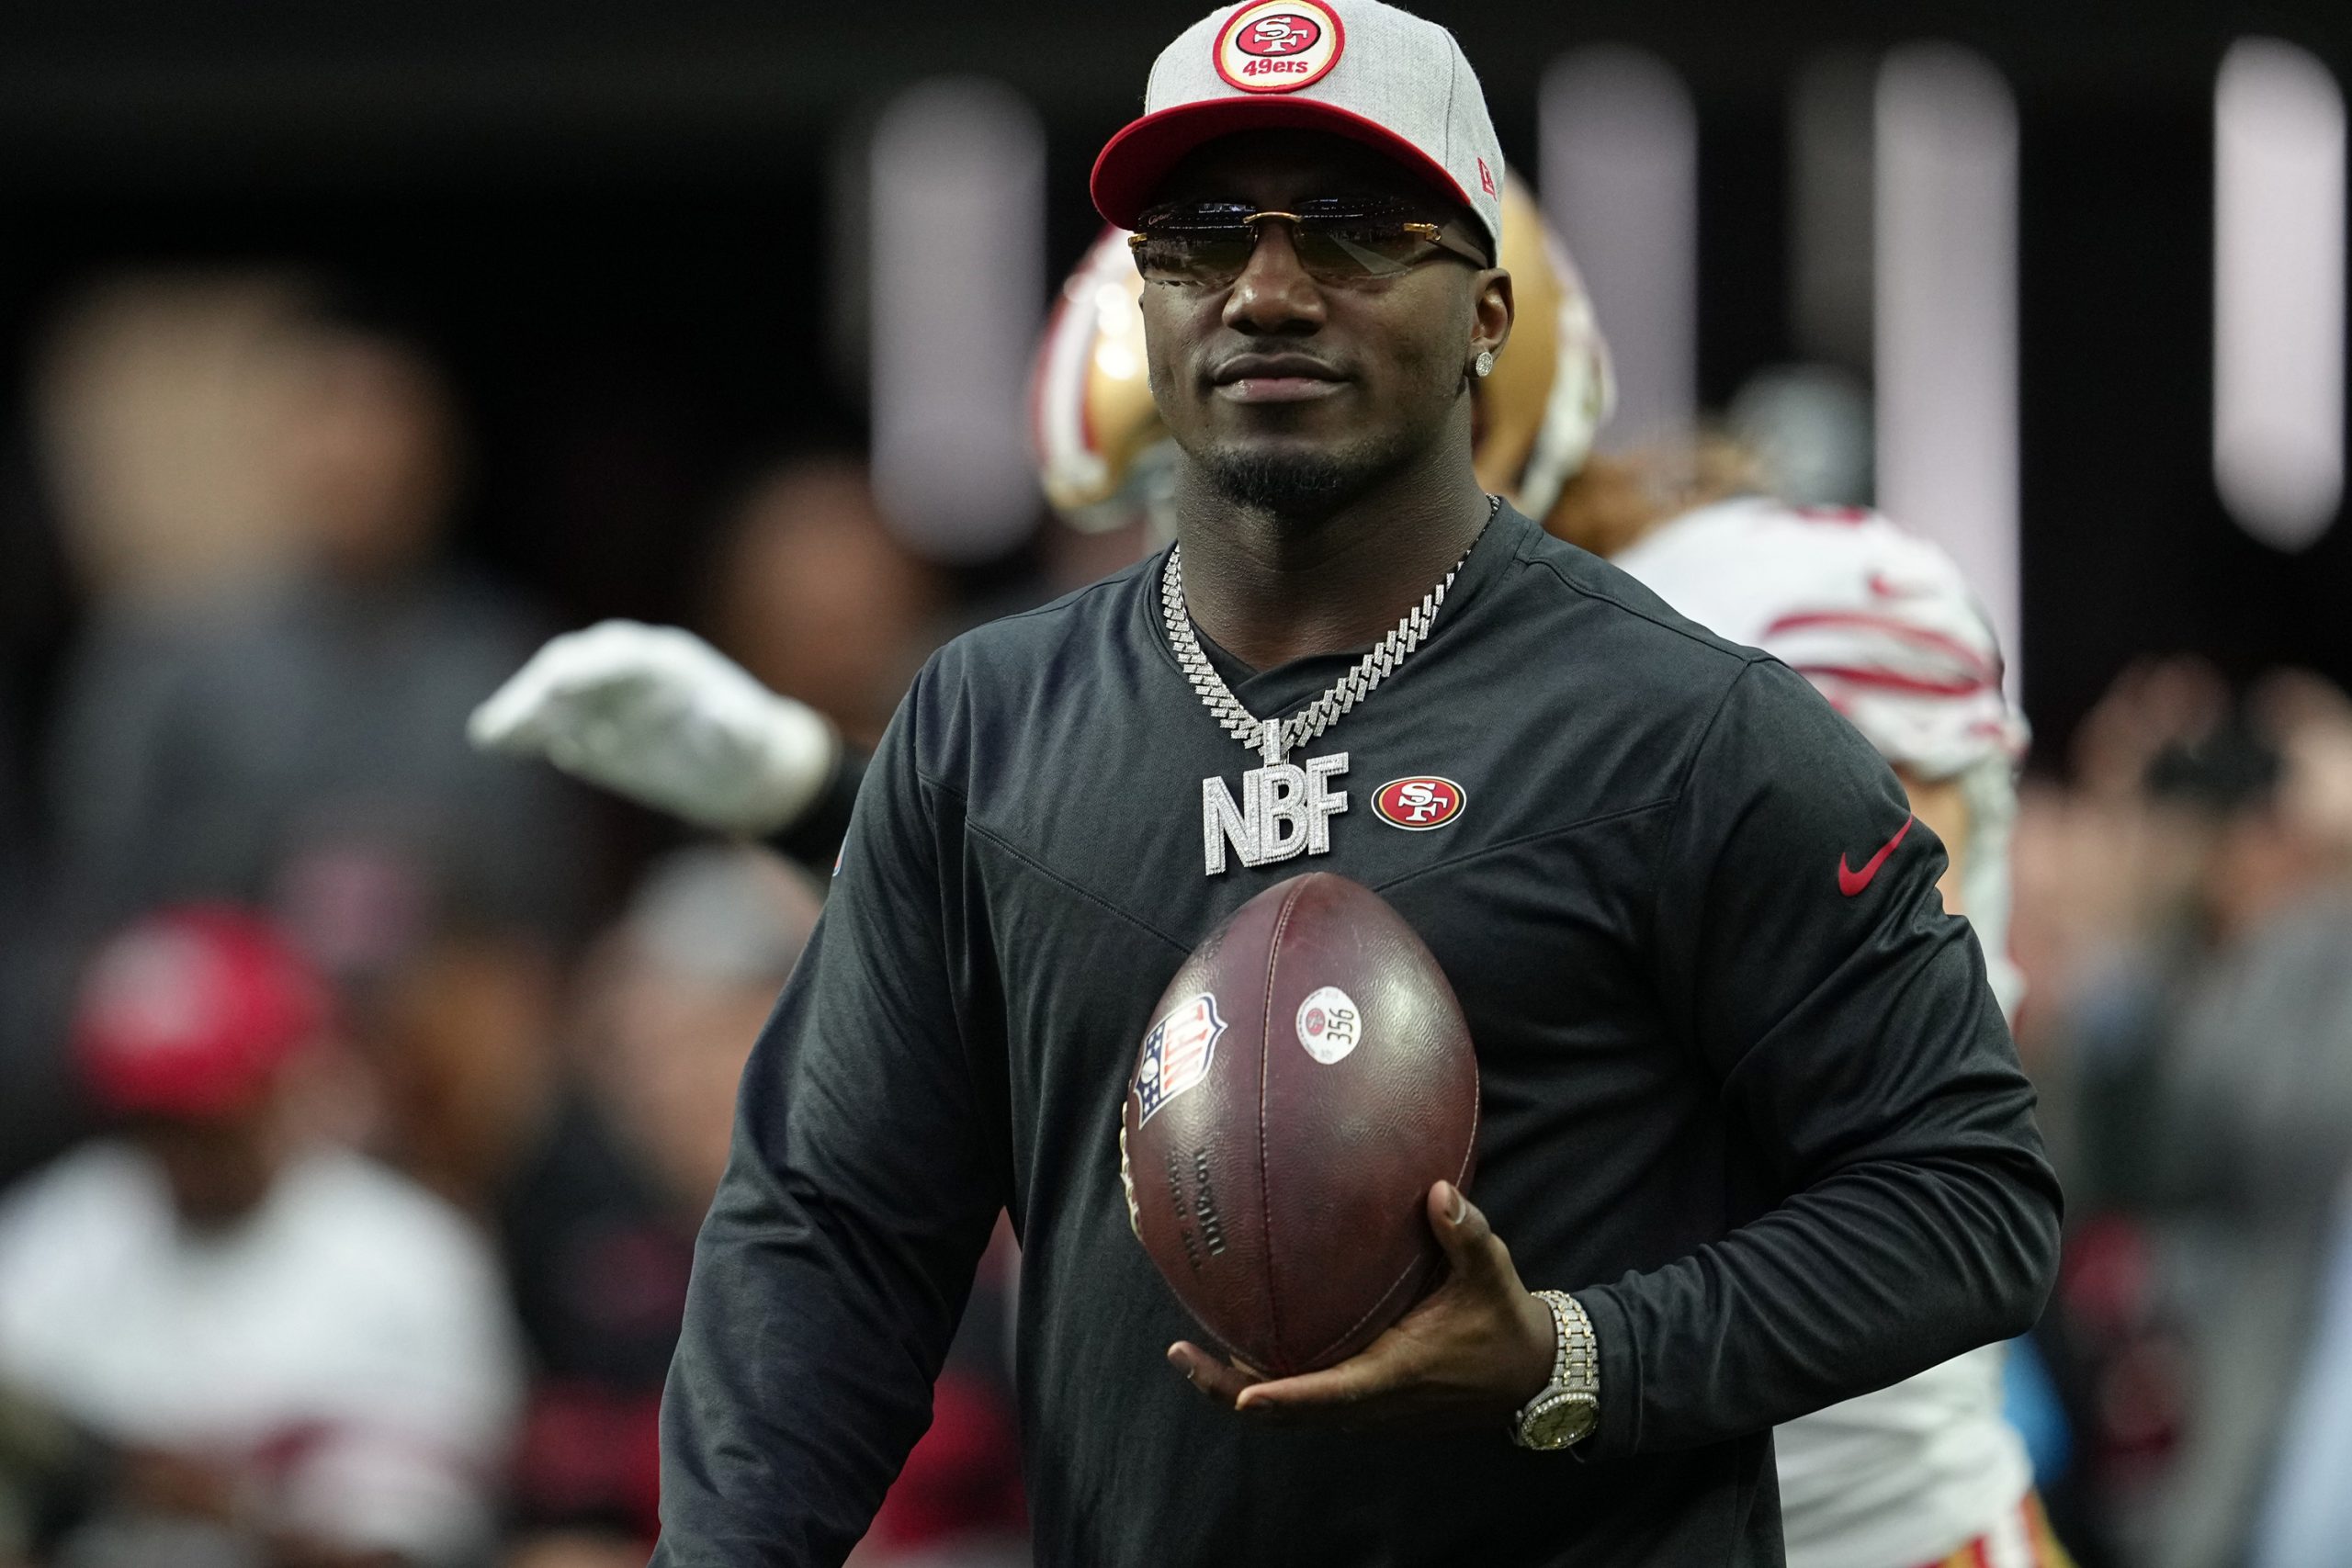 49ers injury report vs. Raiders: Deebo Samuel is out despite practicing